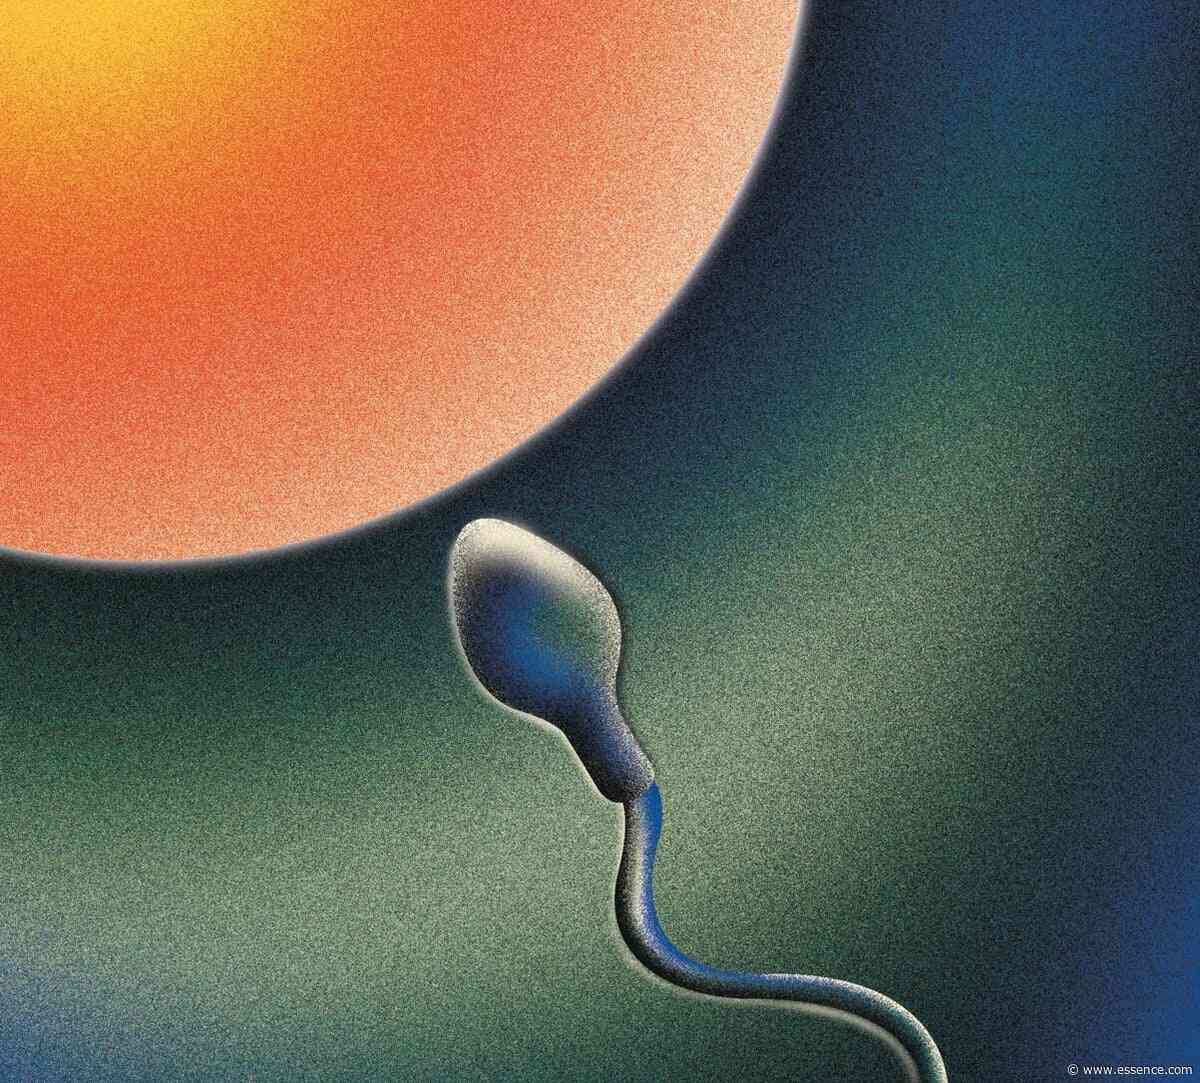 Black Men Open Up About The Silent Stigma Of Infertility